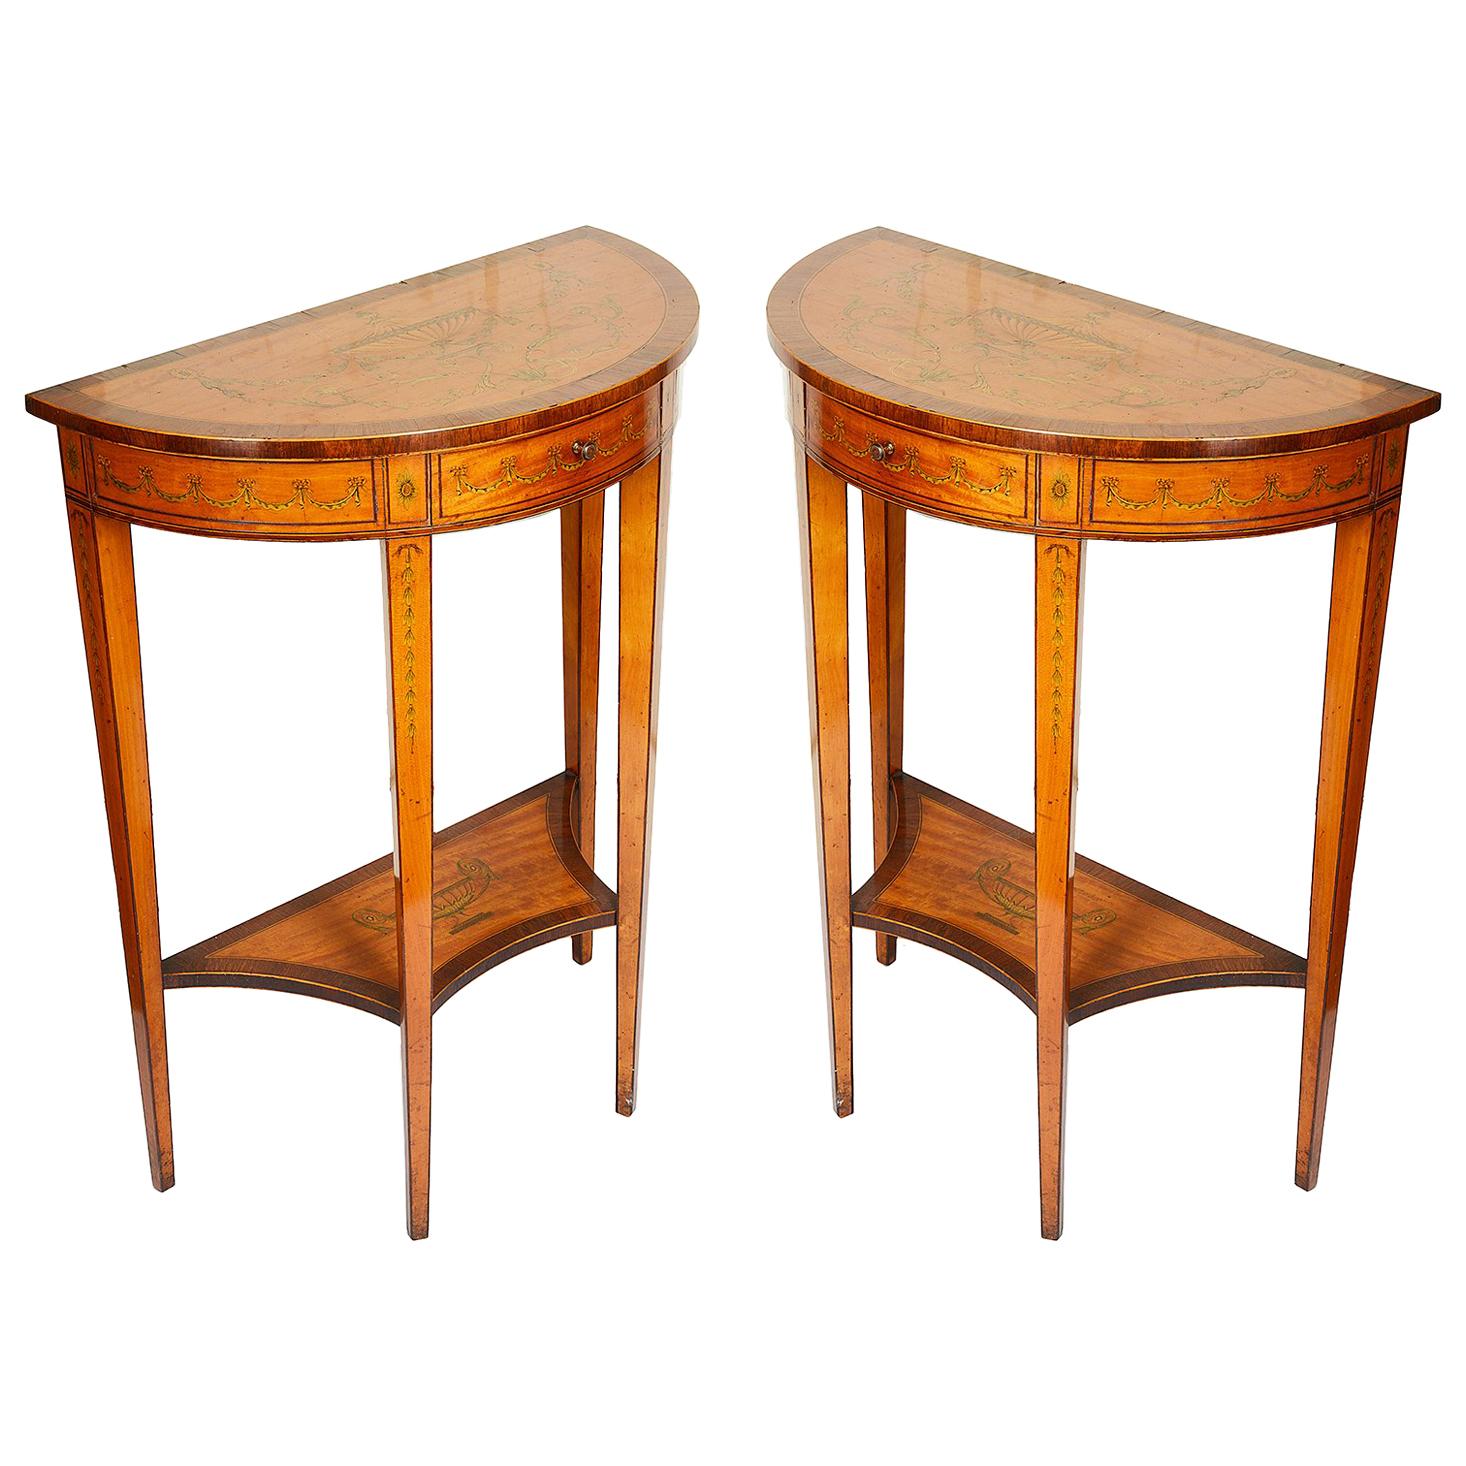 Small Pair of Sheraton Style Console Tables, 19th Century